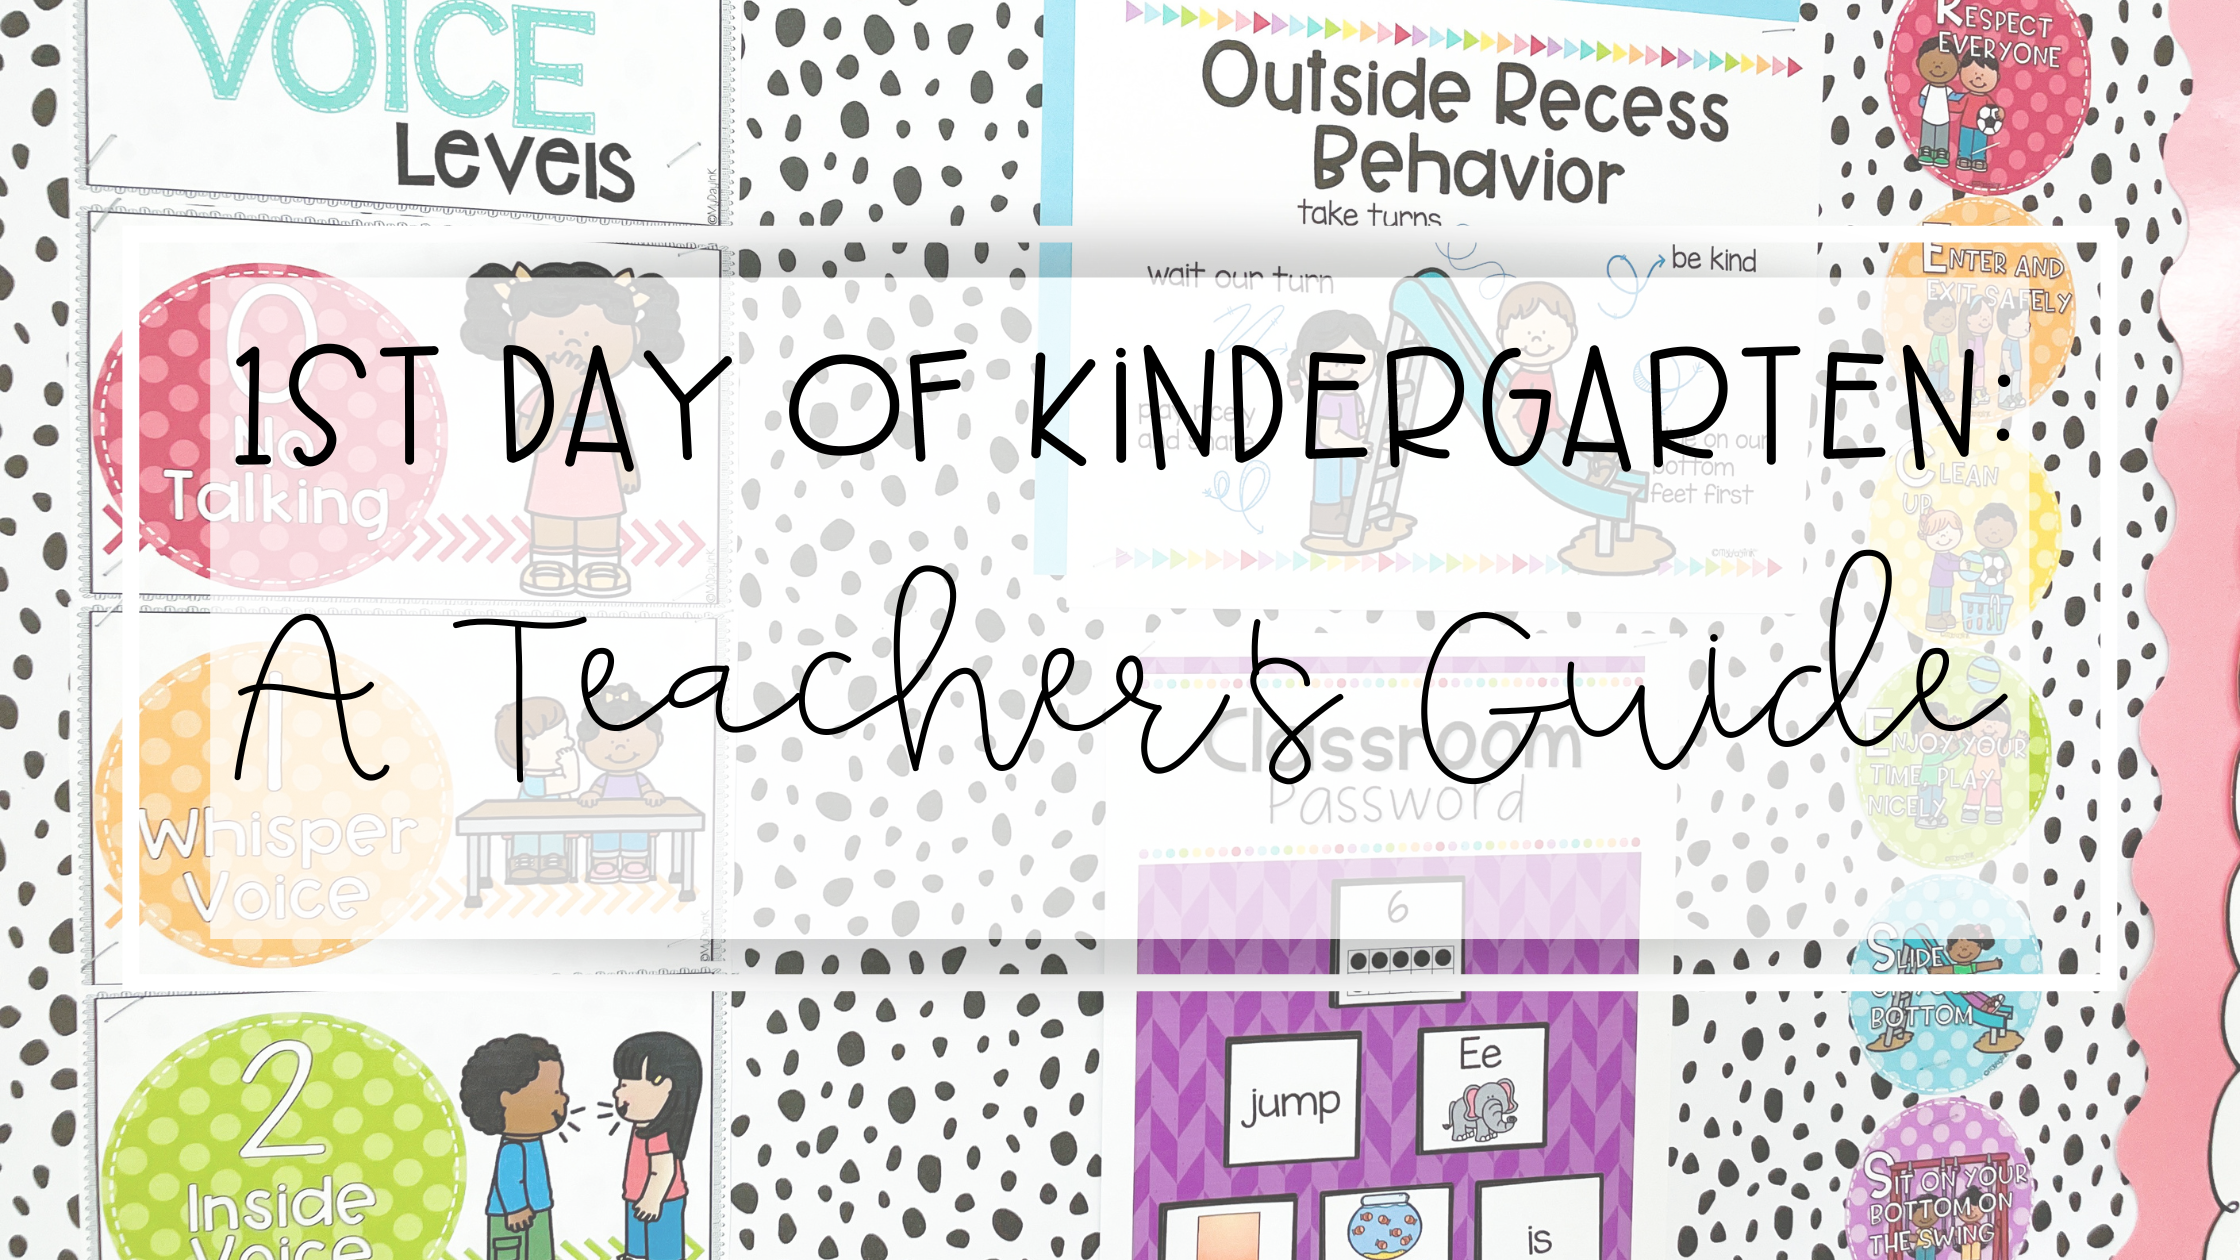 How to Prepare for the First Day of Kindergarten: A Quick Guide for New Teachers